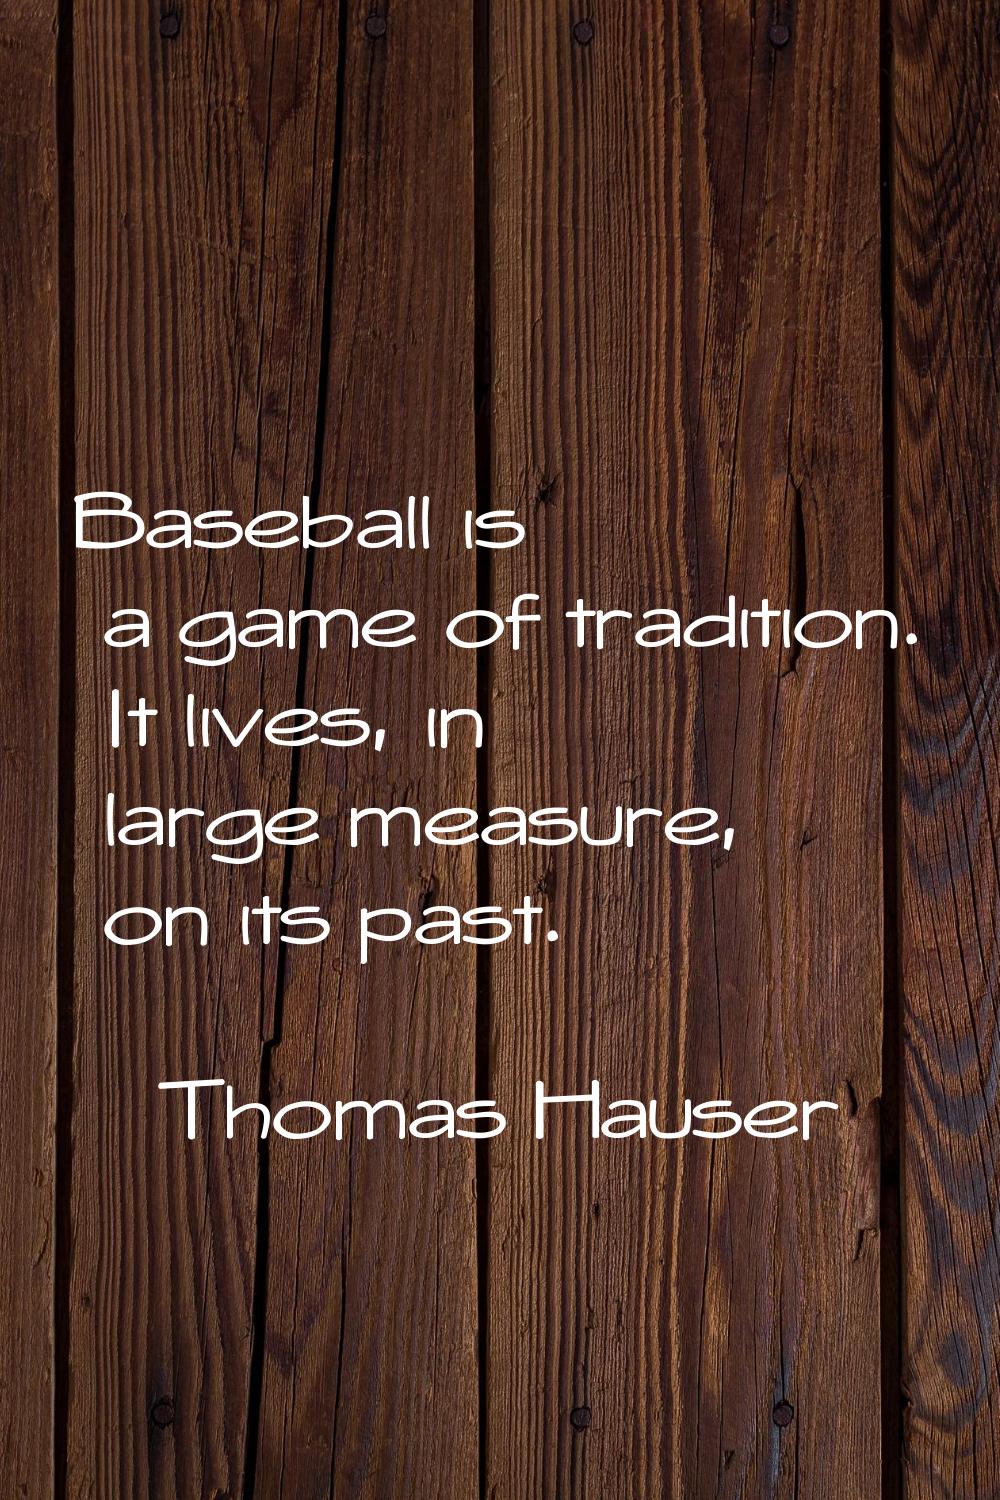 Baseball is a game of tradition. It lives, in large measure, on its past.